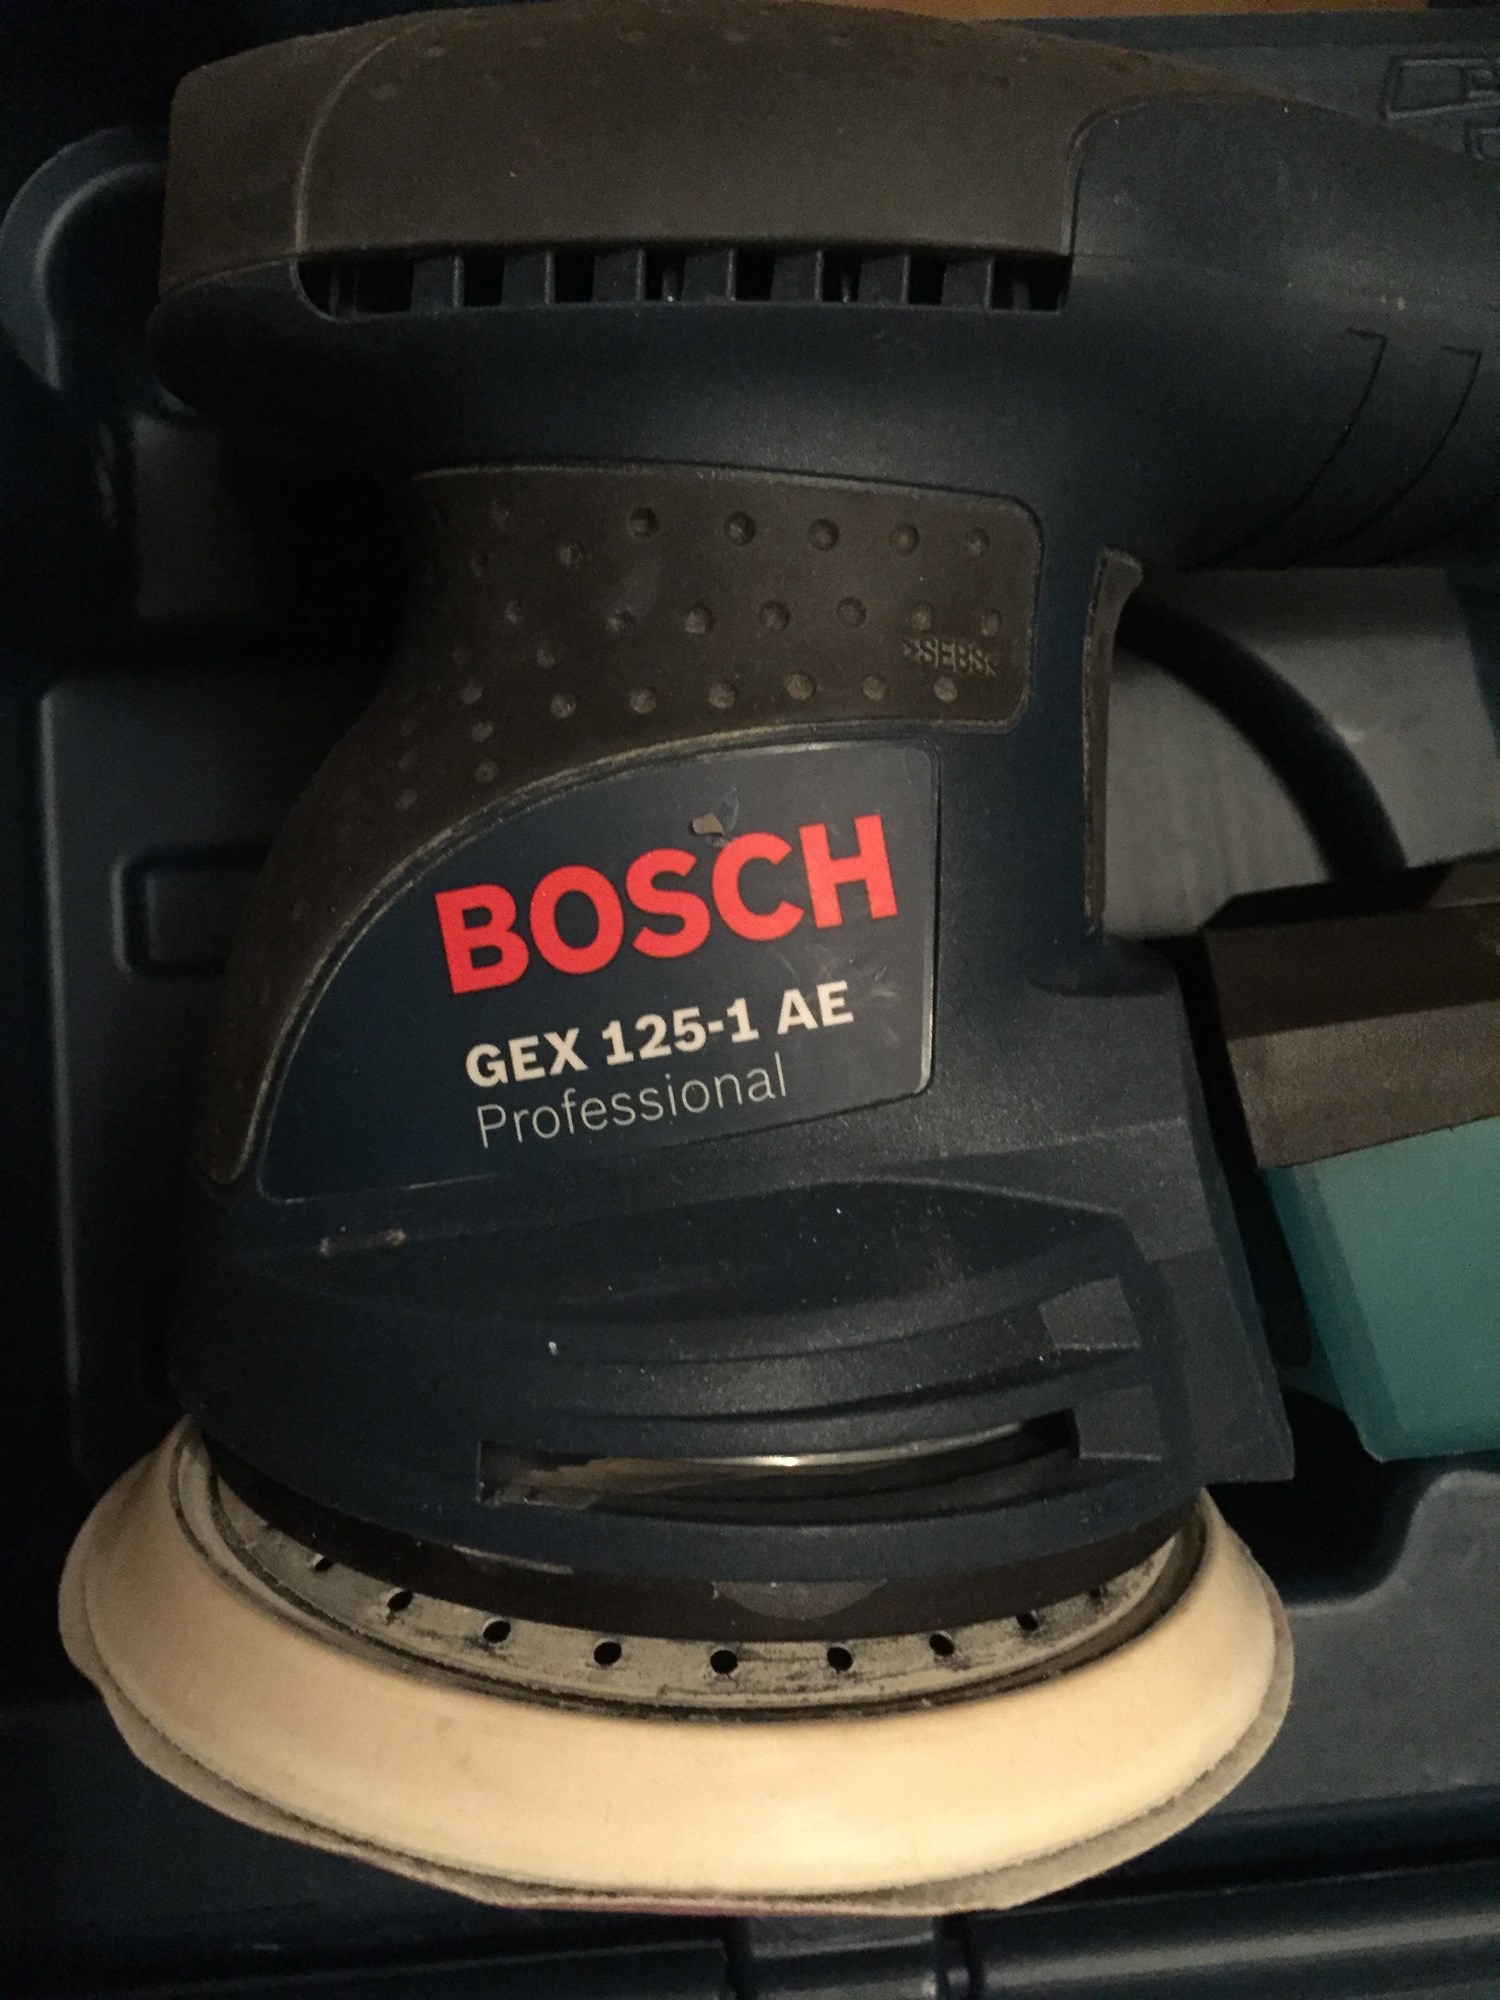 Bosch Gex 125-1 AE - selges kr. 600,- - image.jpeg - andreasg